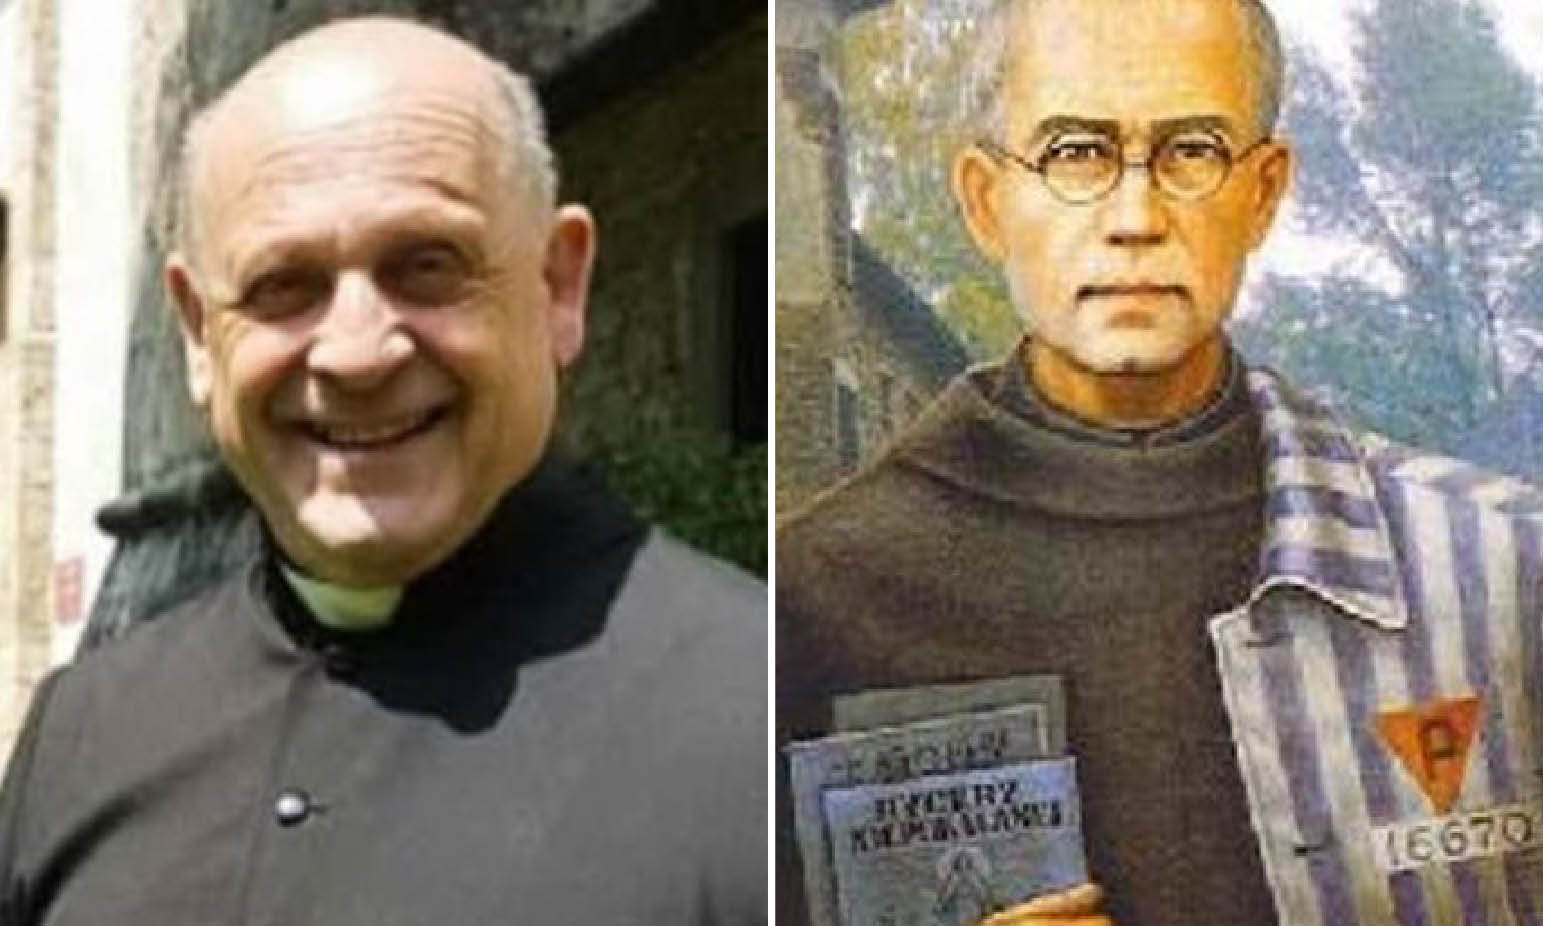 CoronaVirus. Italian Priest gave away Ventilator: Died Sacrificing Life for Another as Father Kolbe in Auschwitz